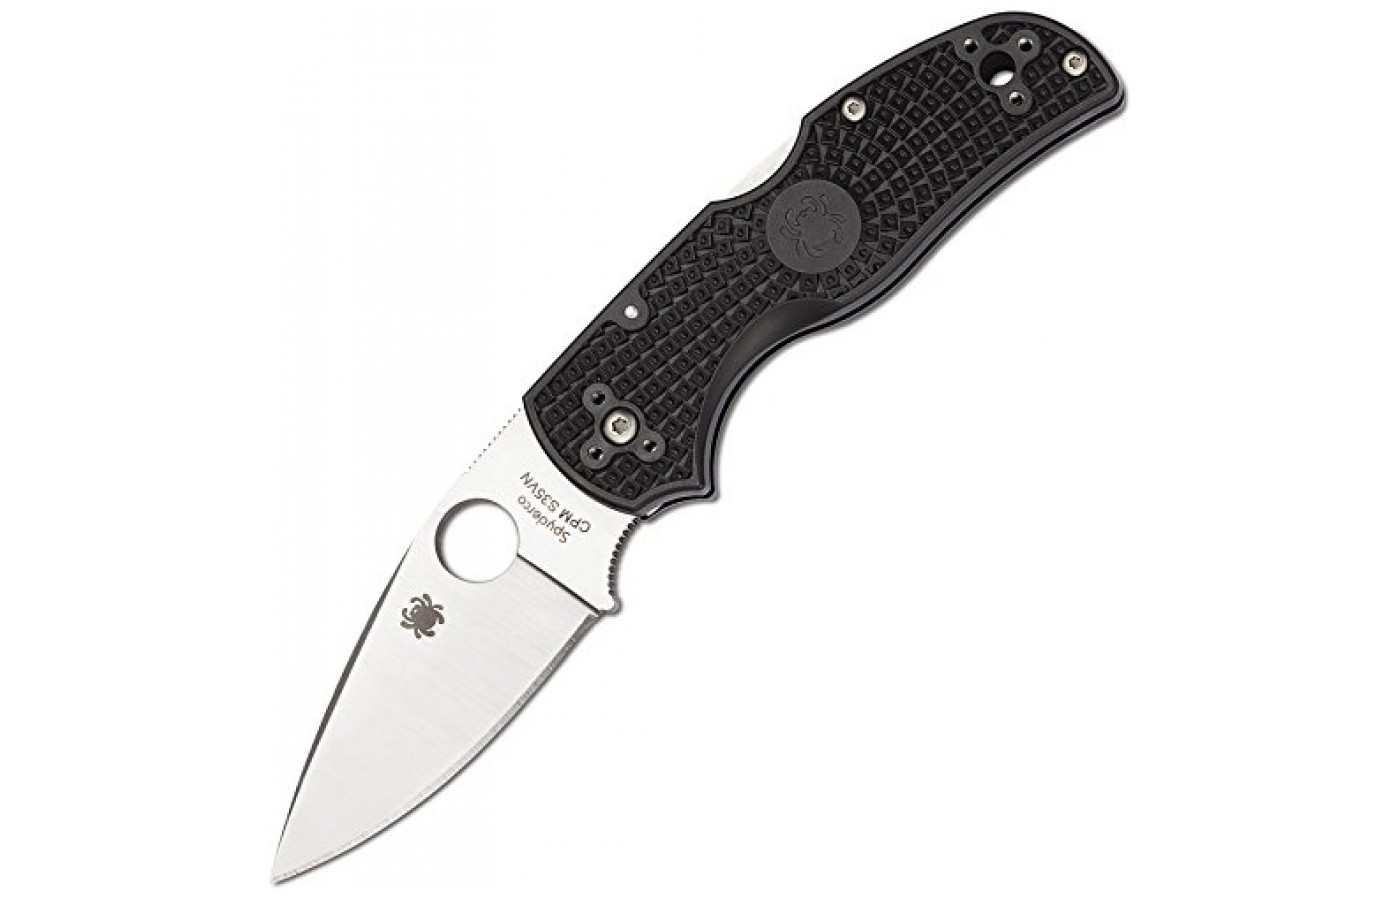 This is designed after Spyderco's original models.